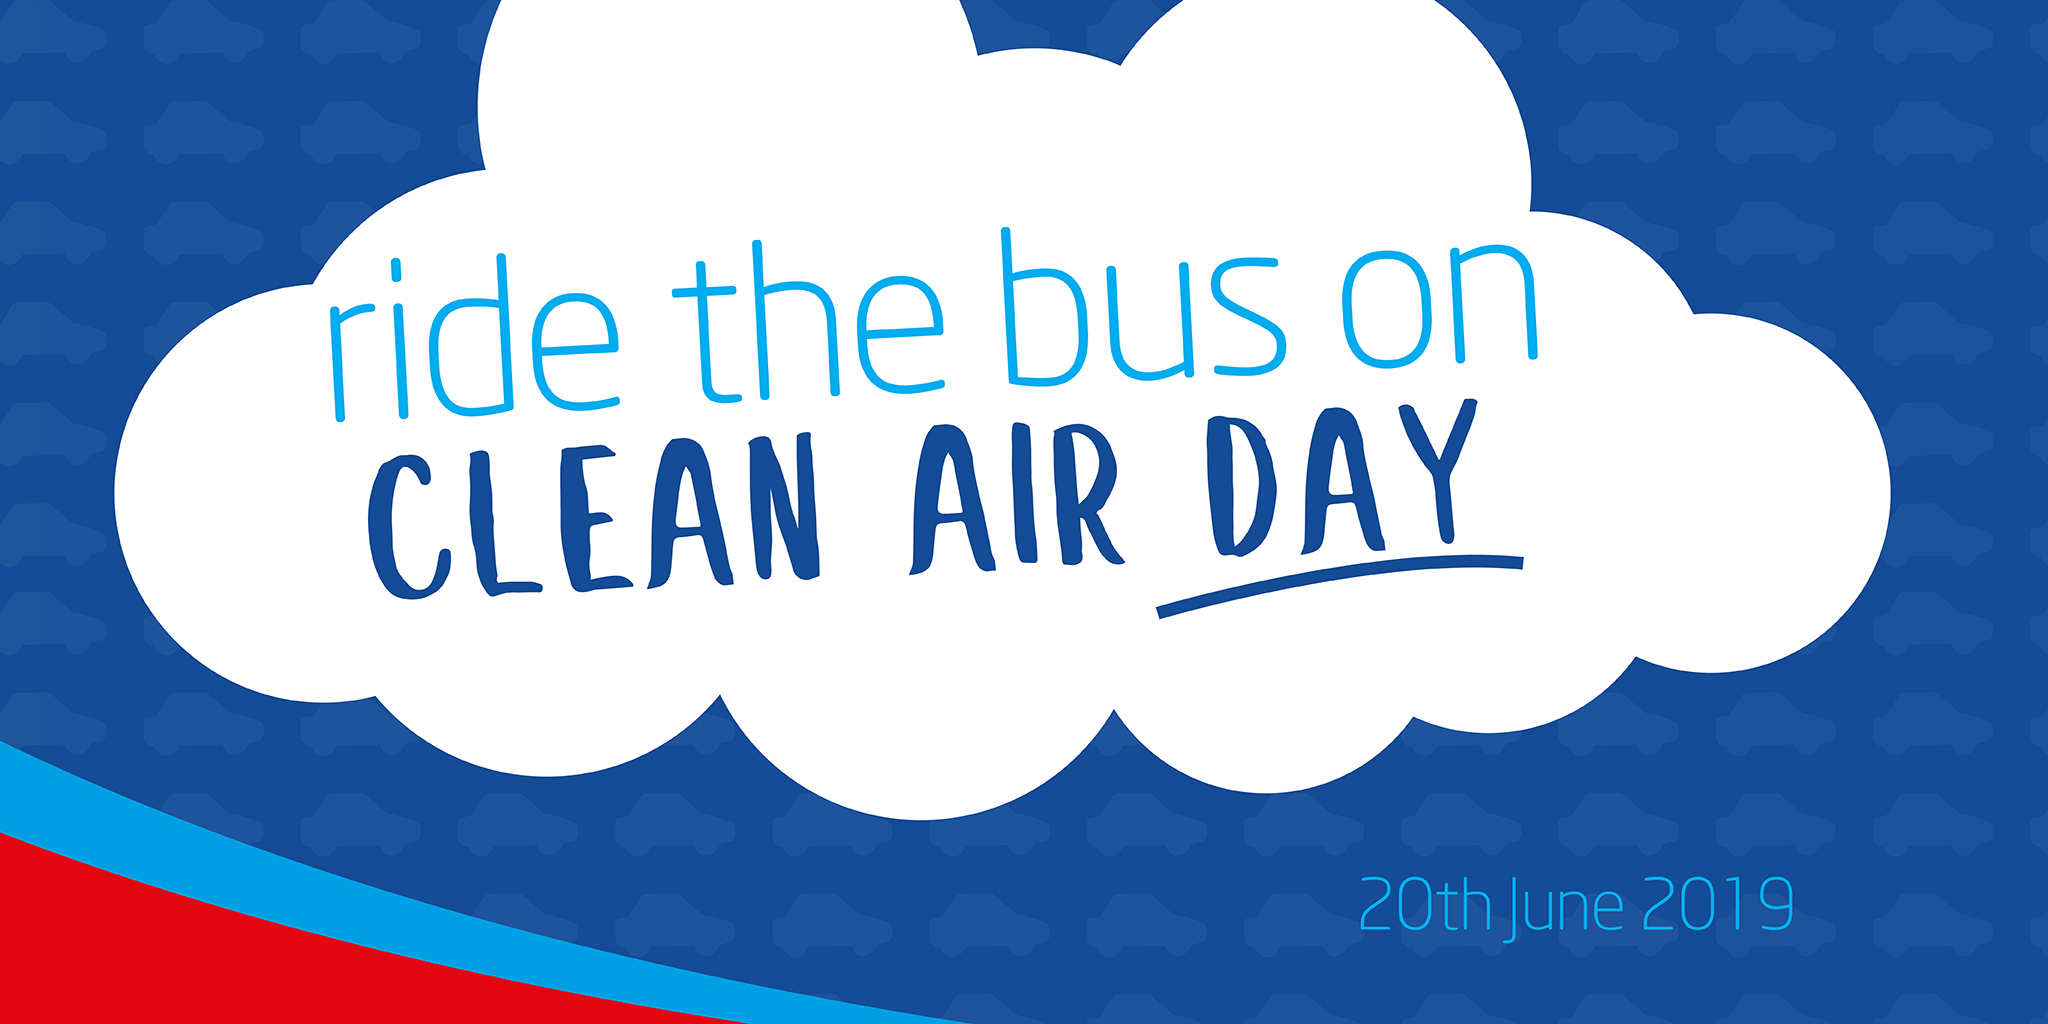 morebus Clean Air Day - travel for just £1